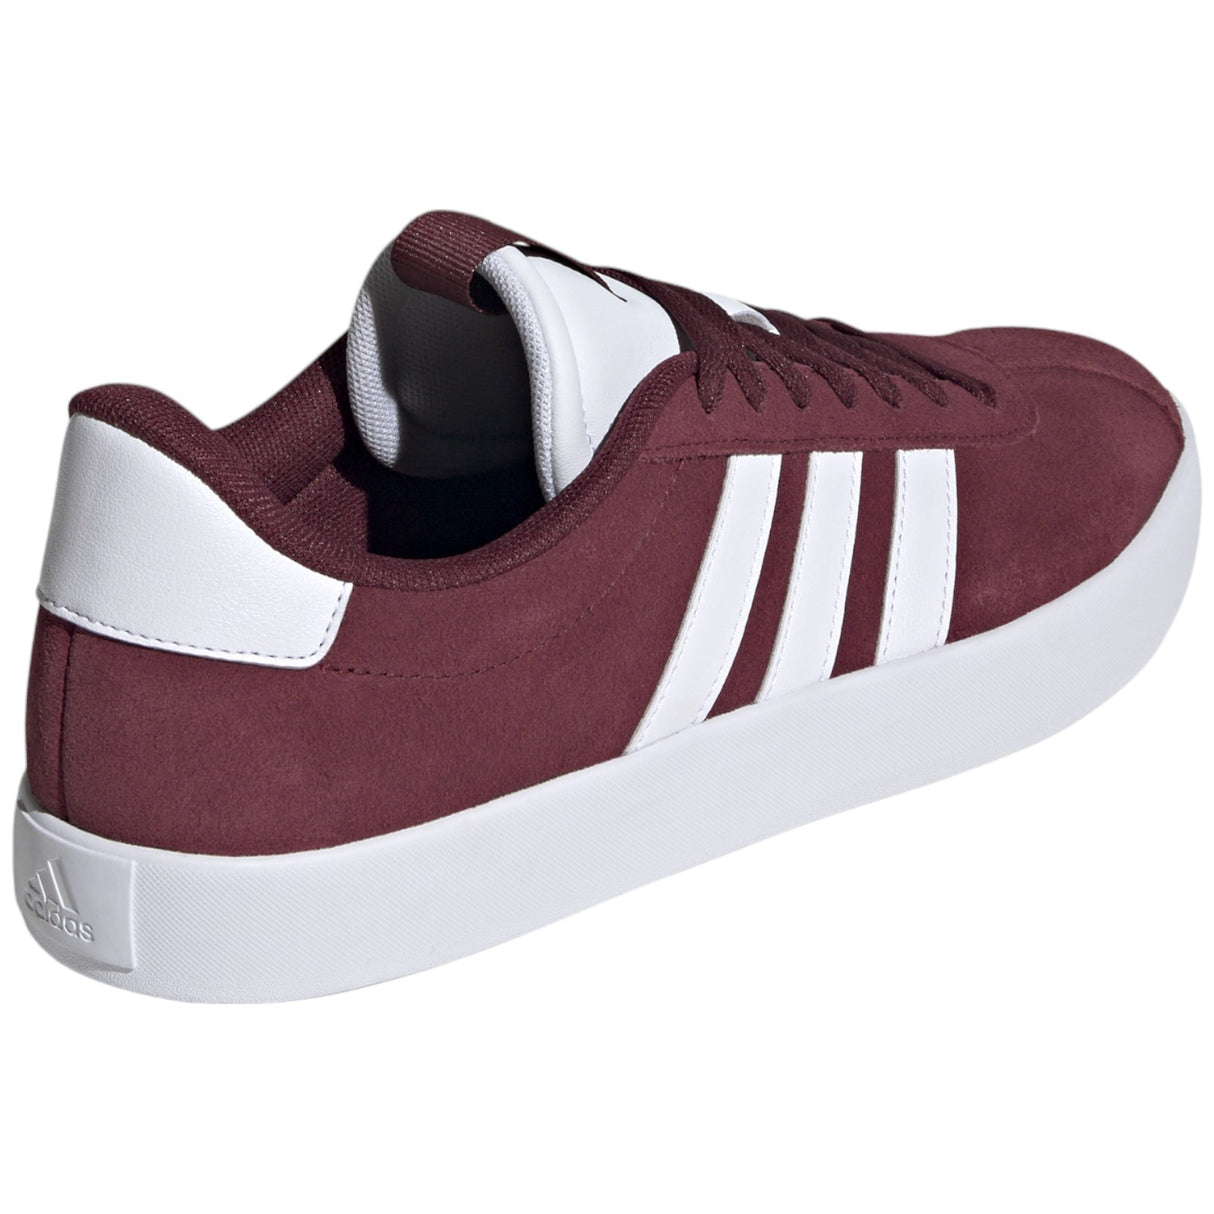 adidas VL Court 3.0 Mens Trainers